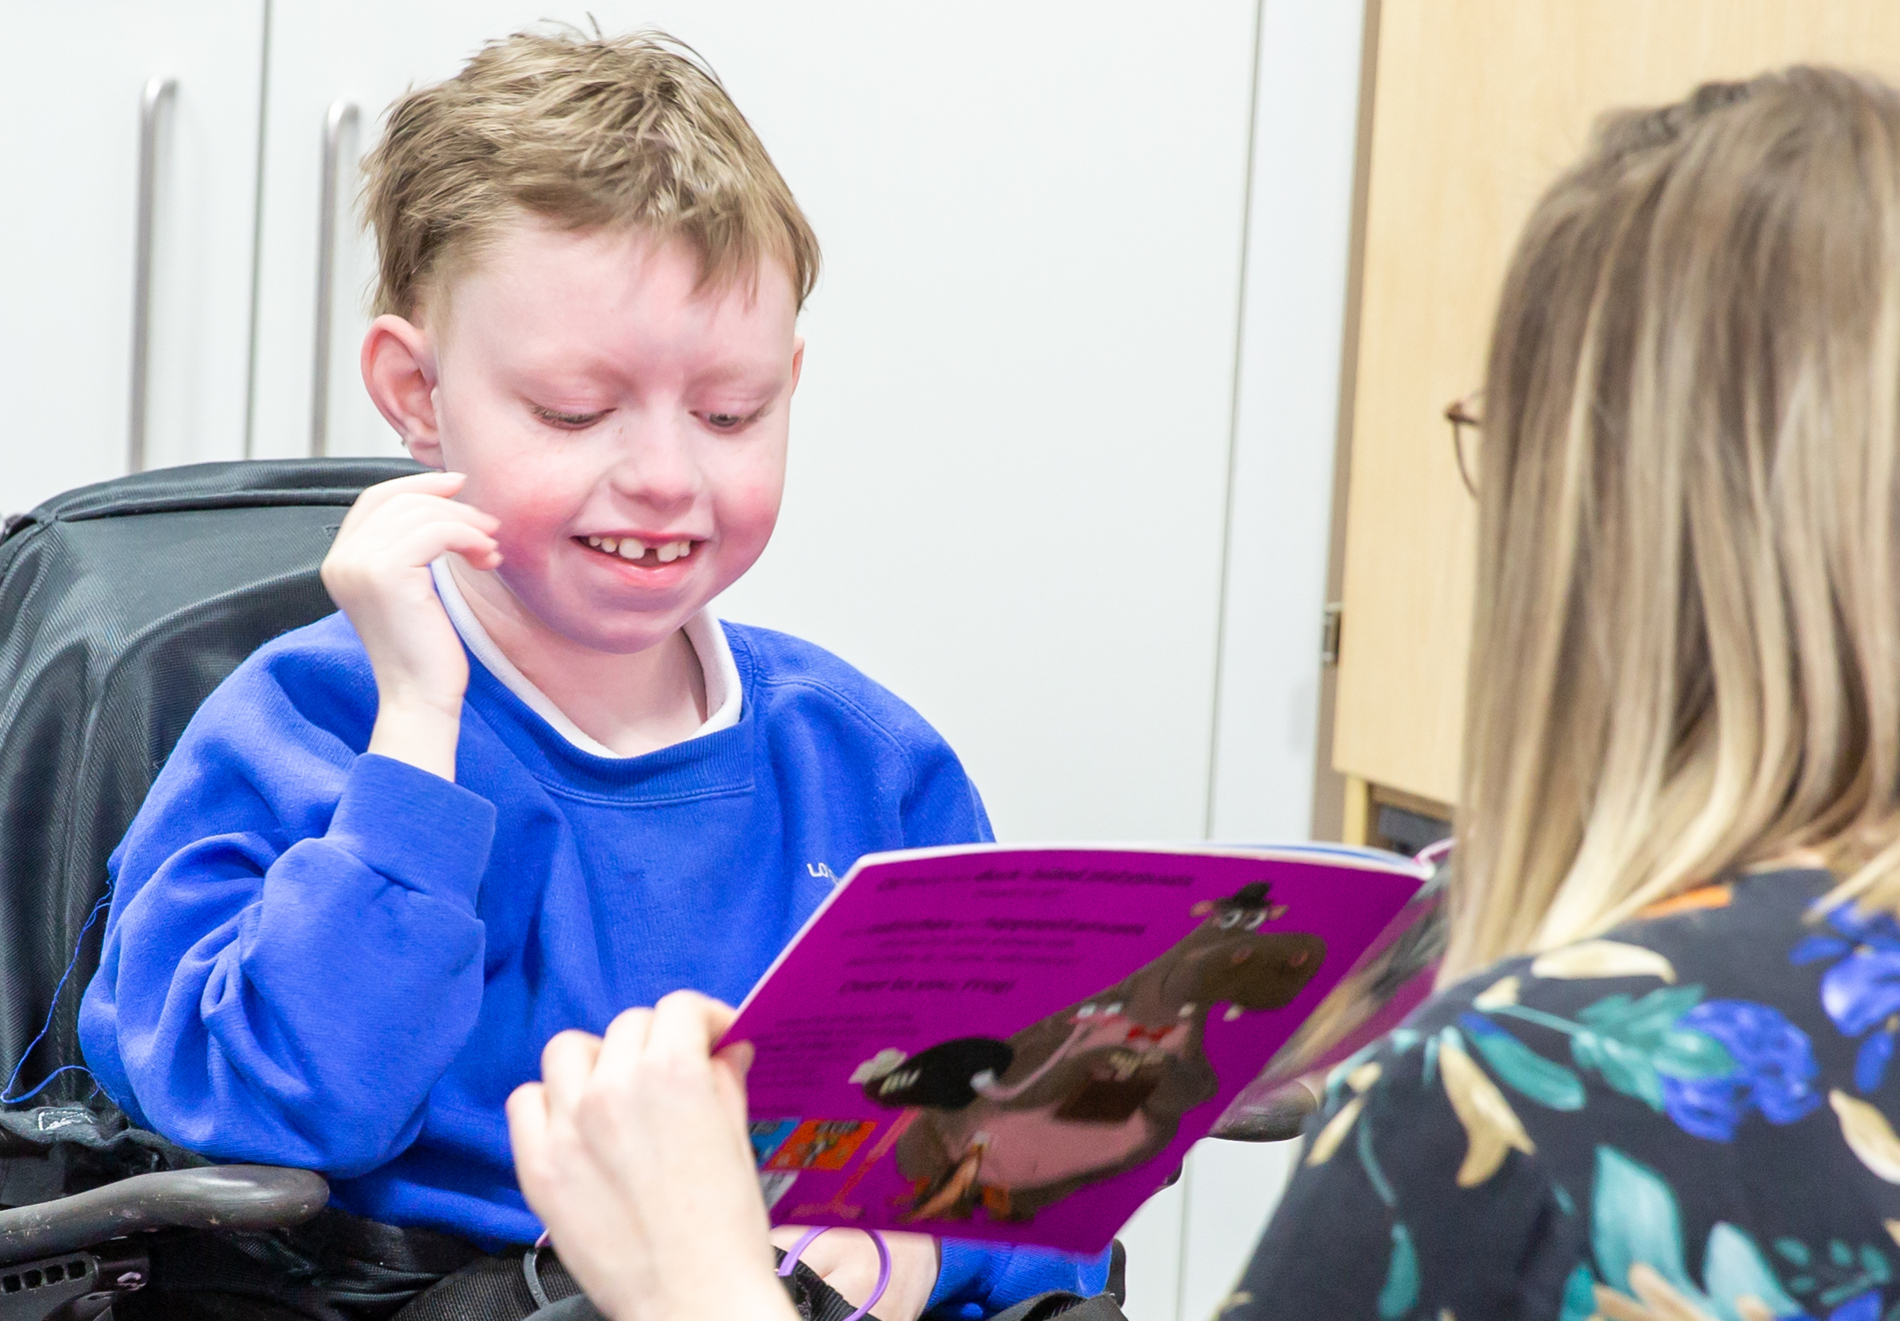 A young boy with a Au-kline syndrome engaging in learning at a special needs school